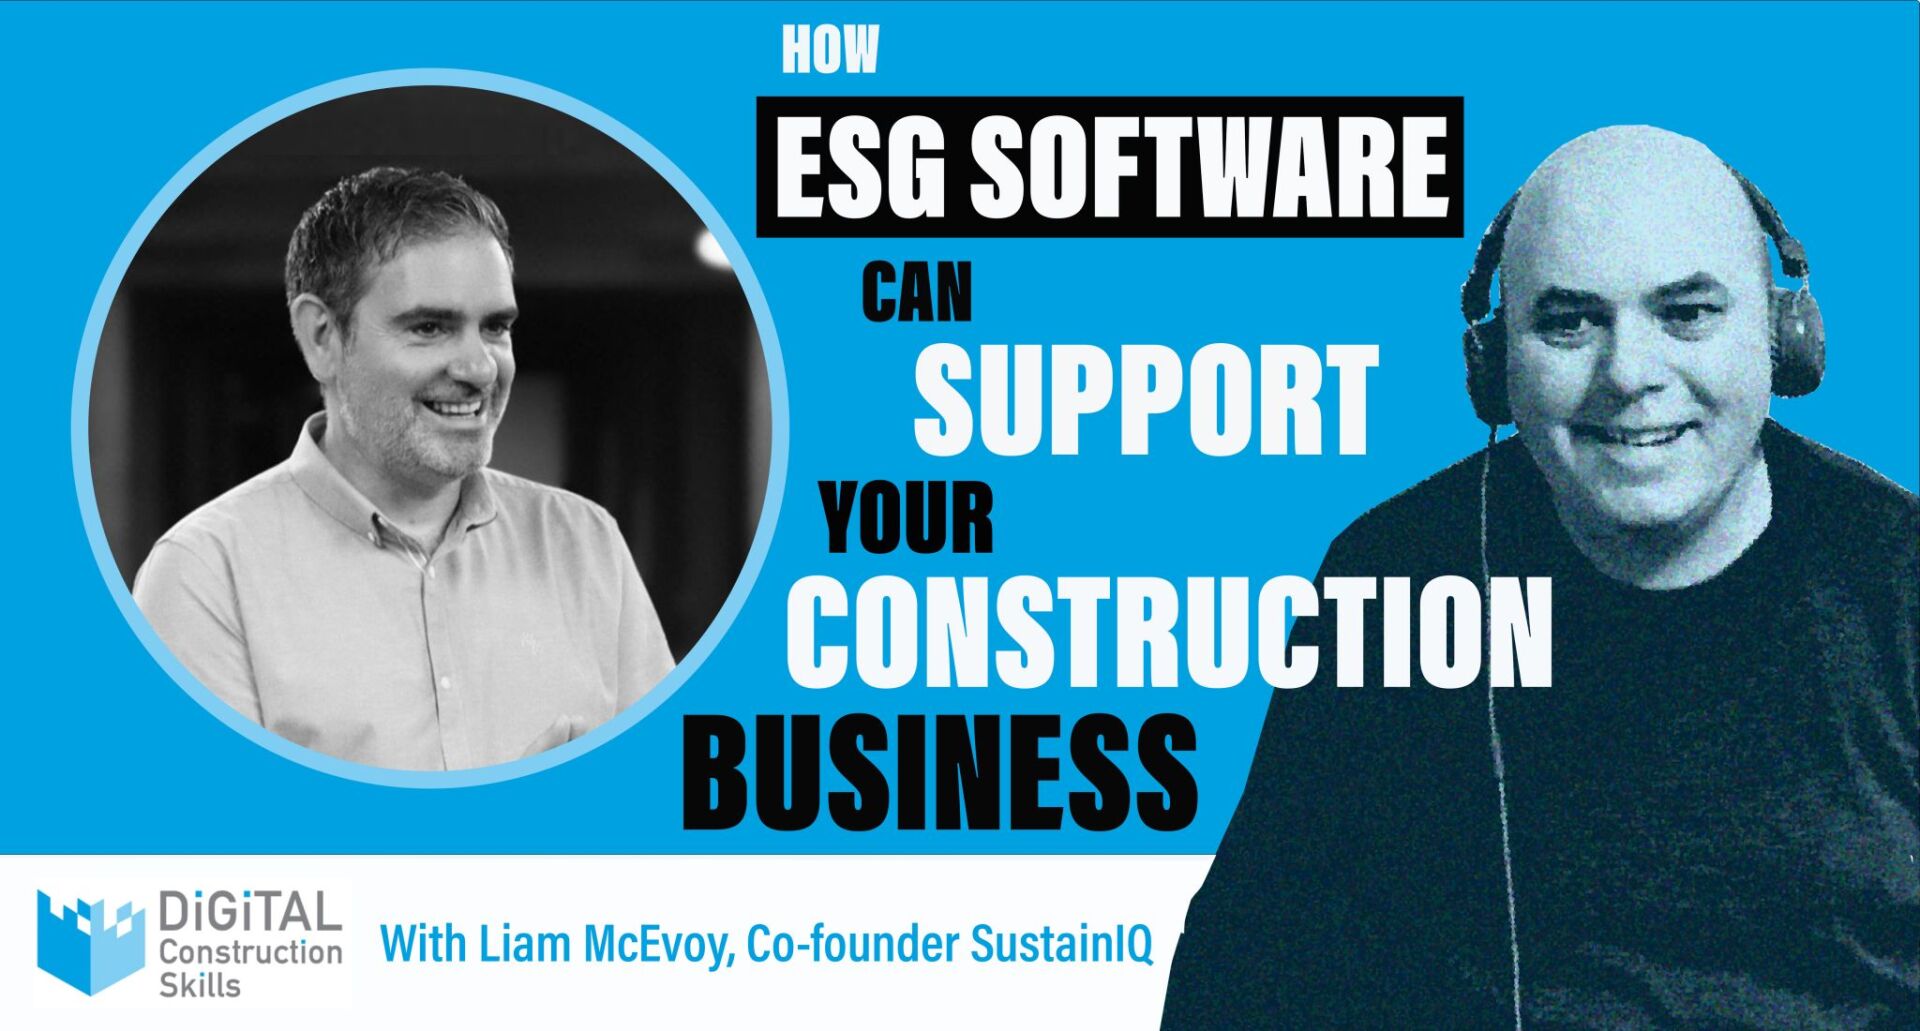 How ESG software can support your construction business, with Liam McEvoy, Co-Founder of SustainIQ